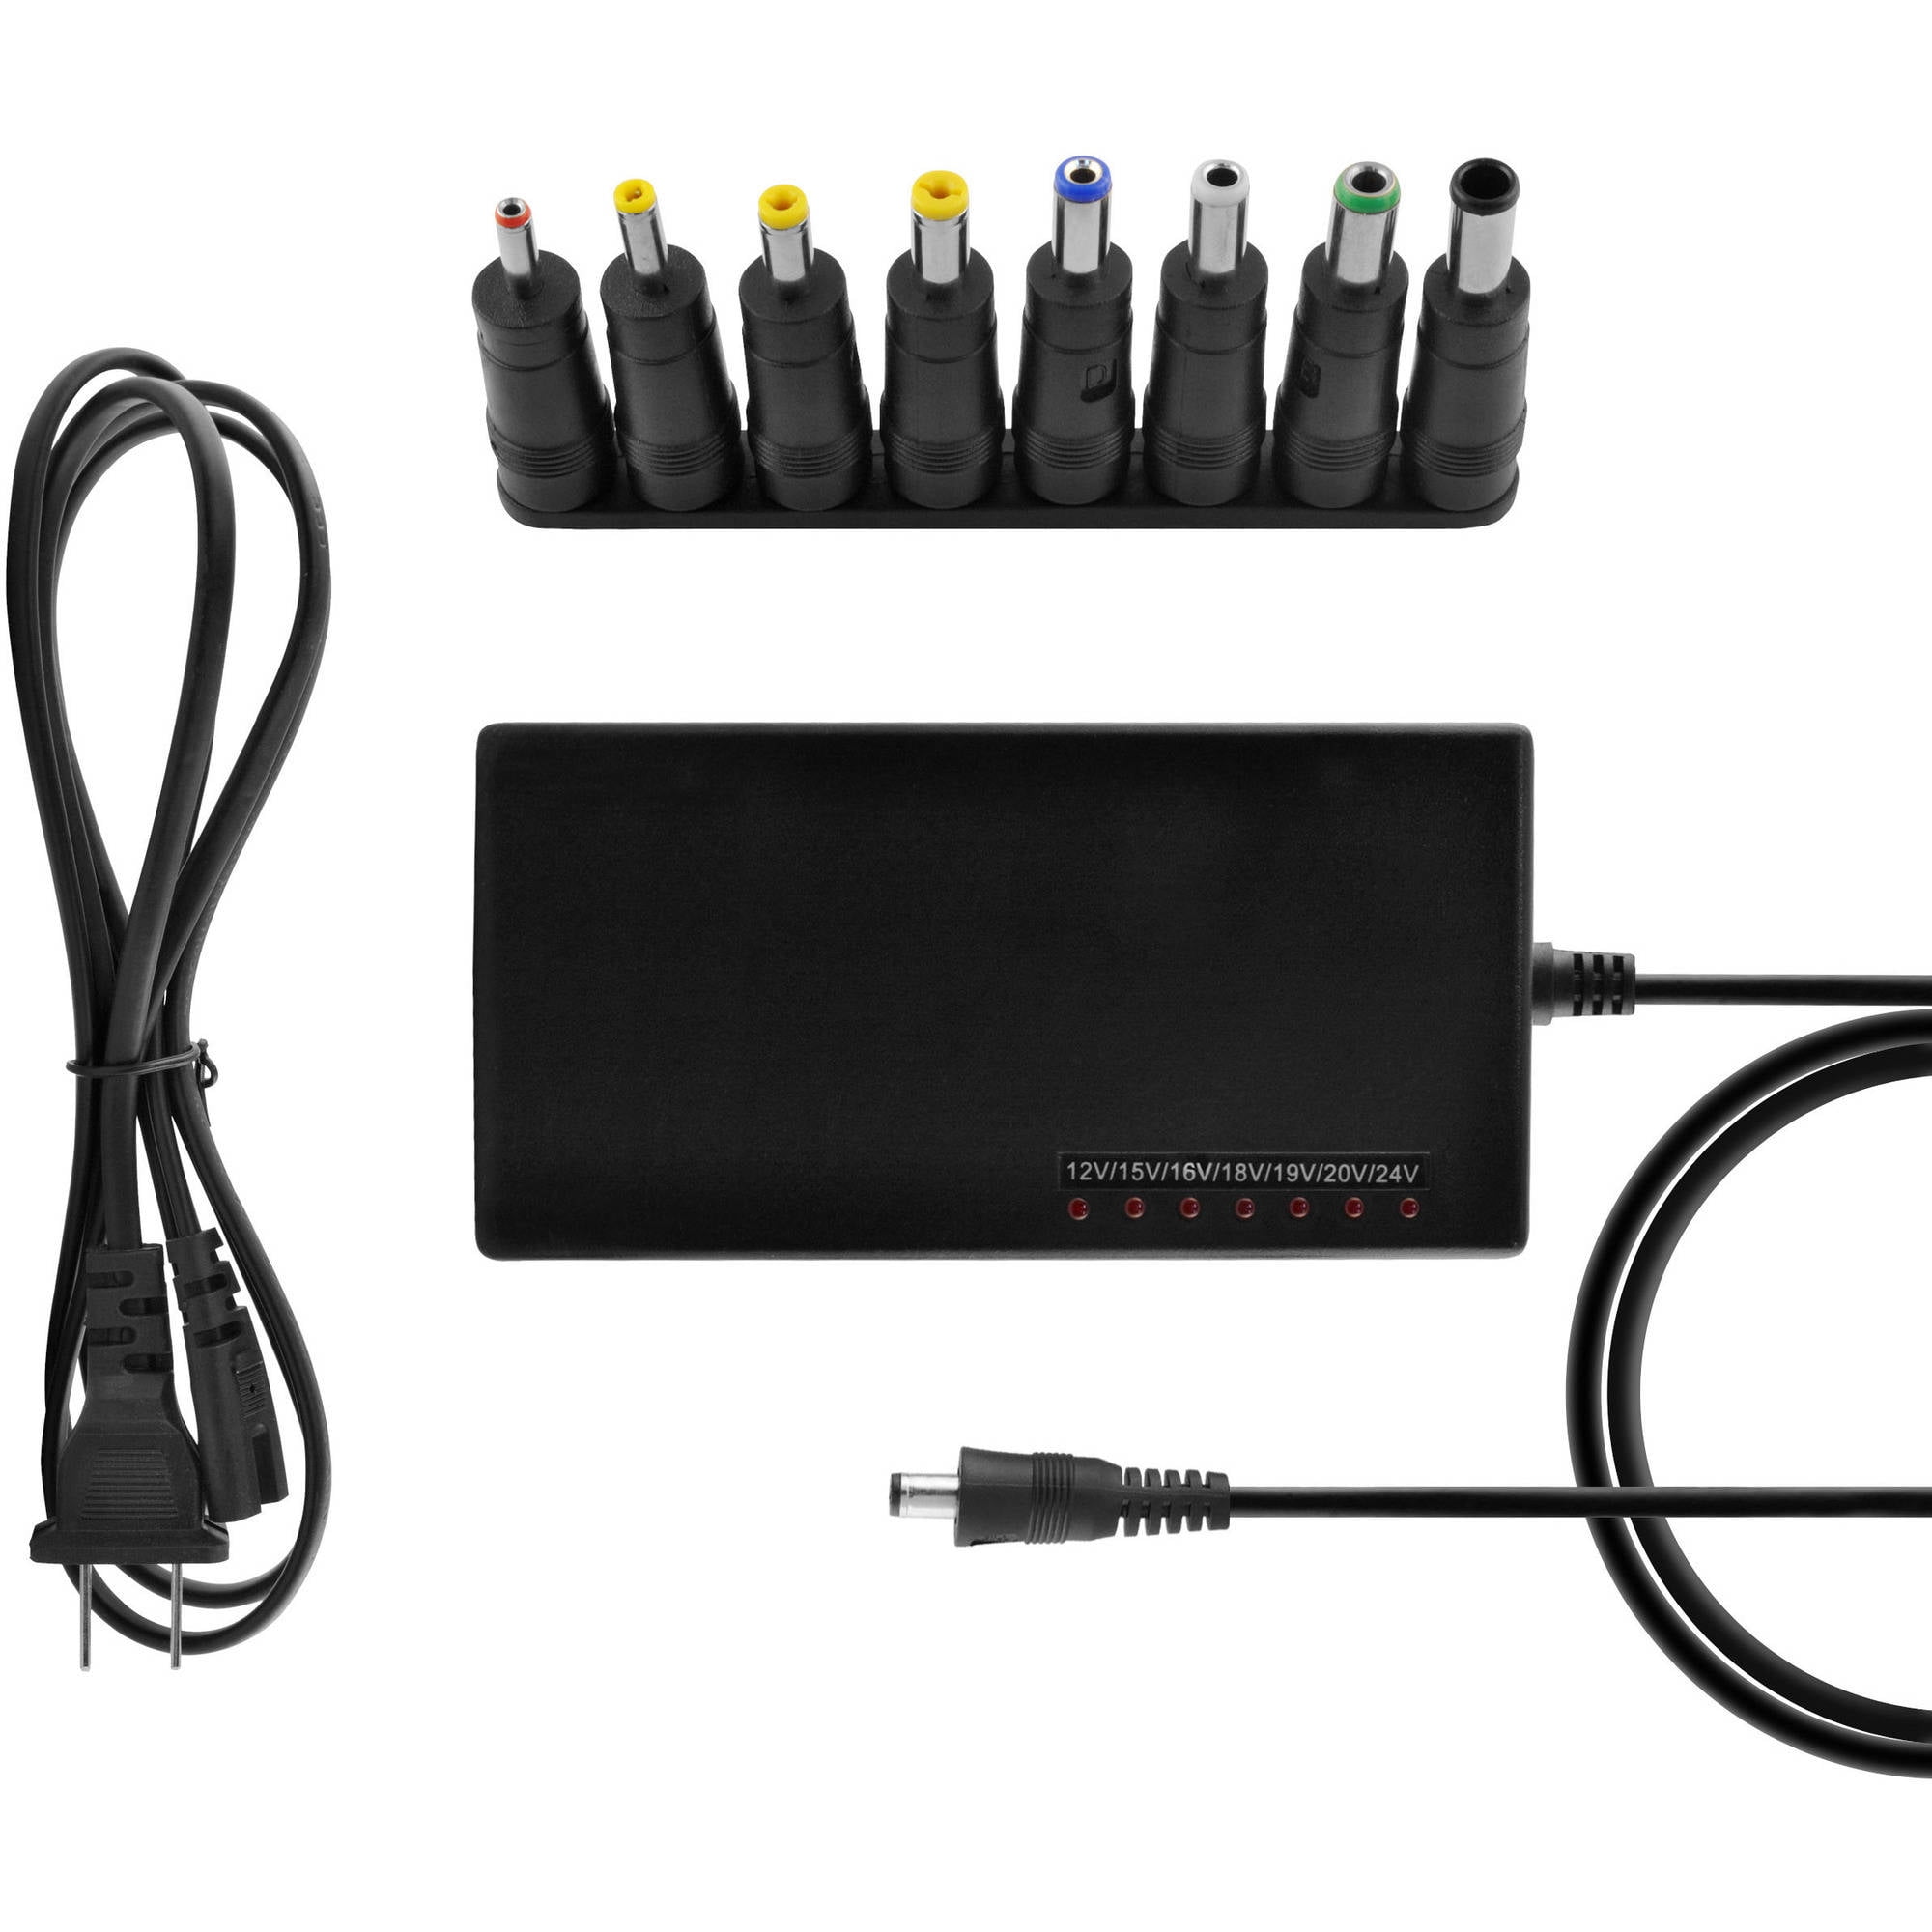 Ematic 90W Universal Laptop Charger 